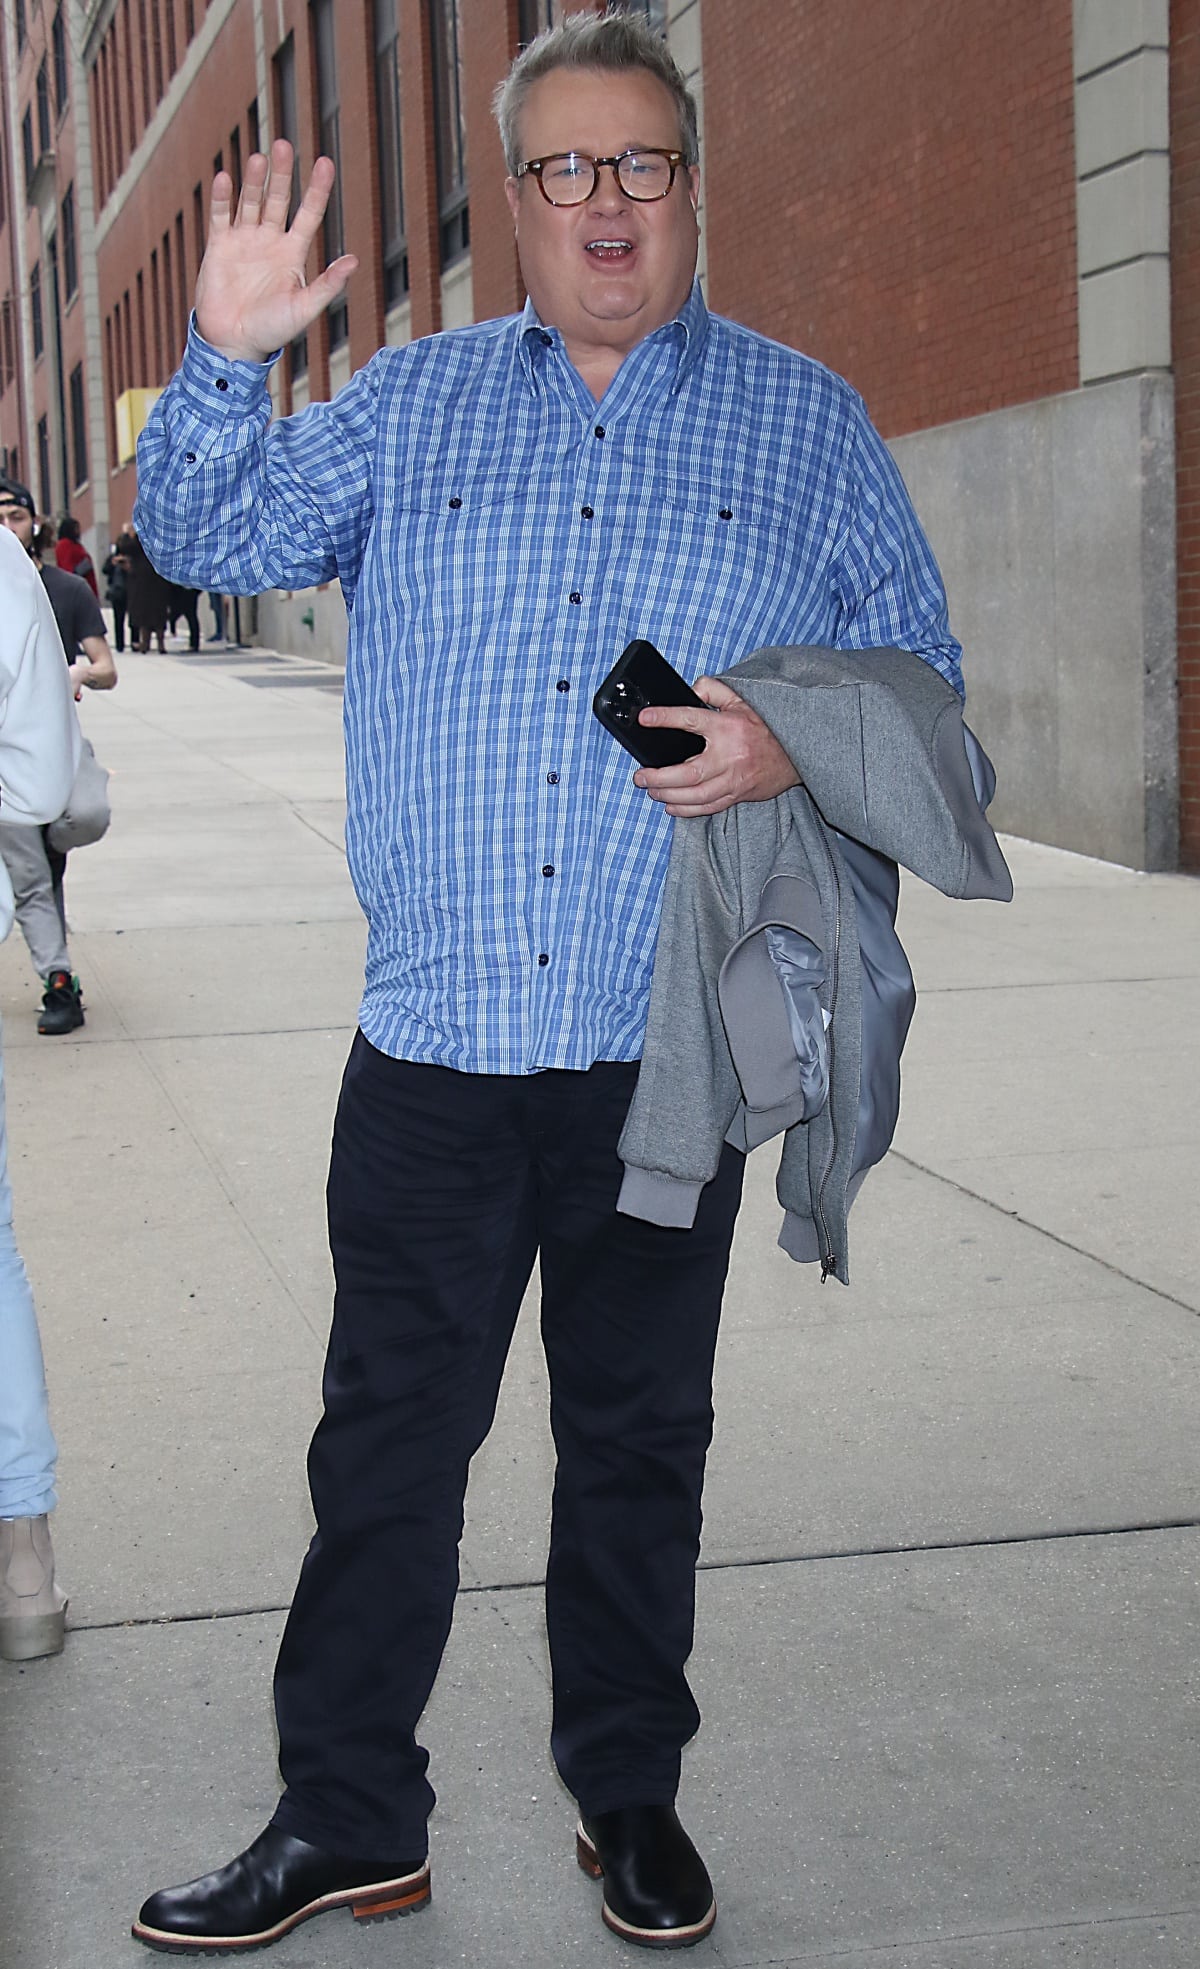 Eric Stonestreet stands at 6 feet and has a net worth of $23 million